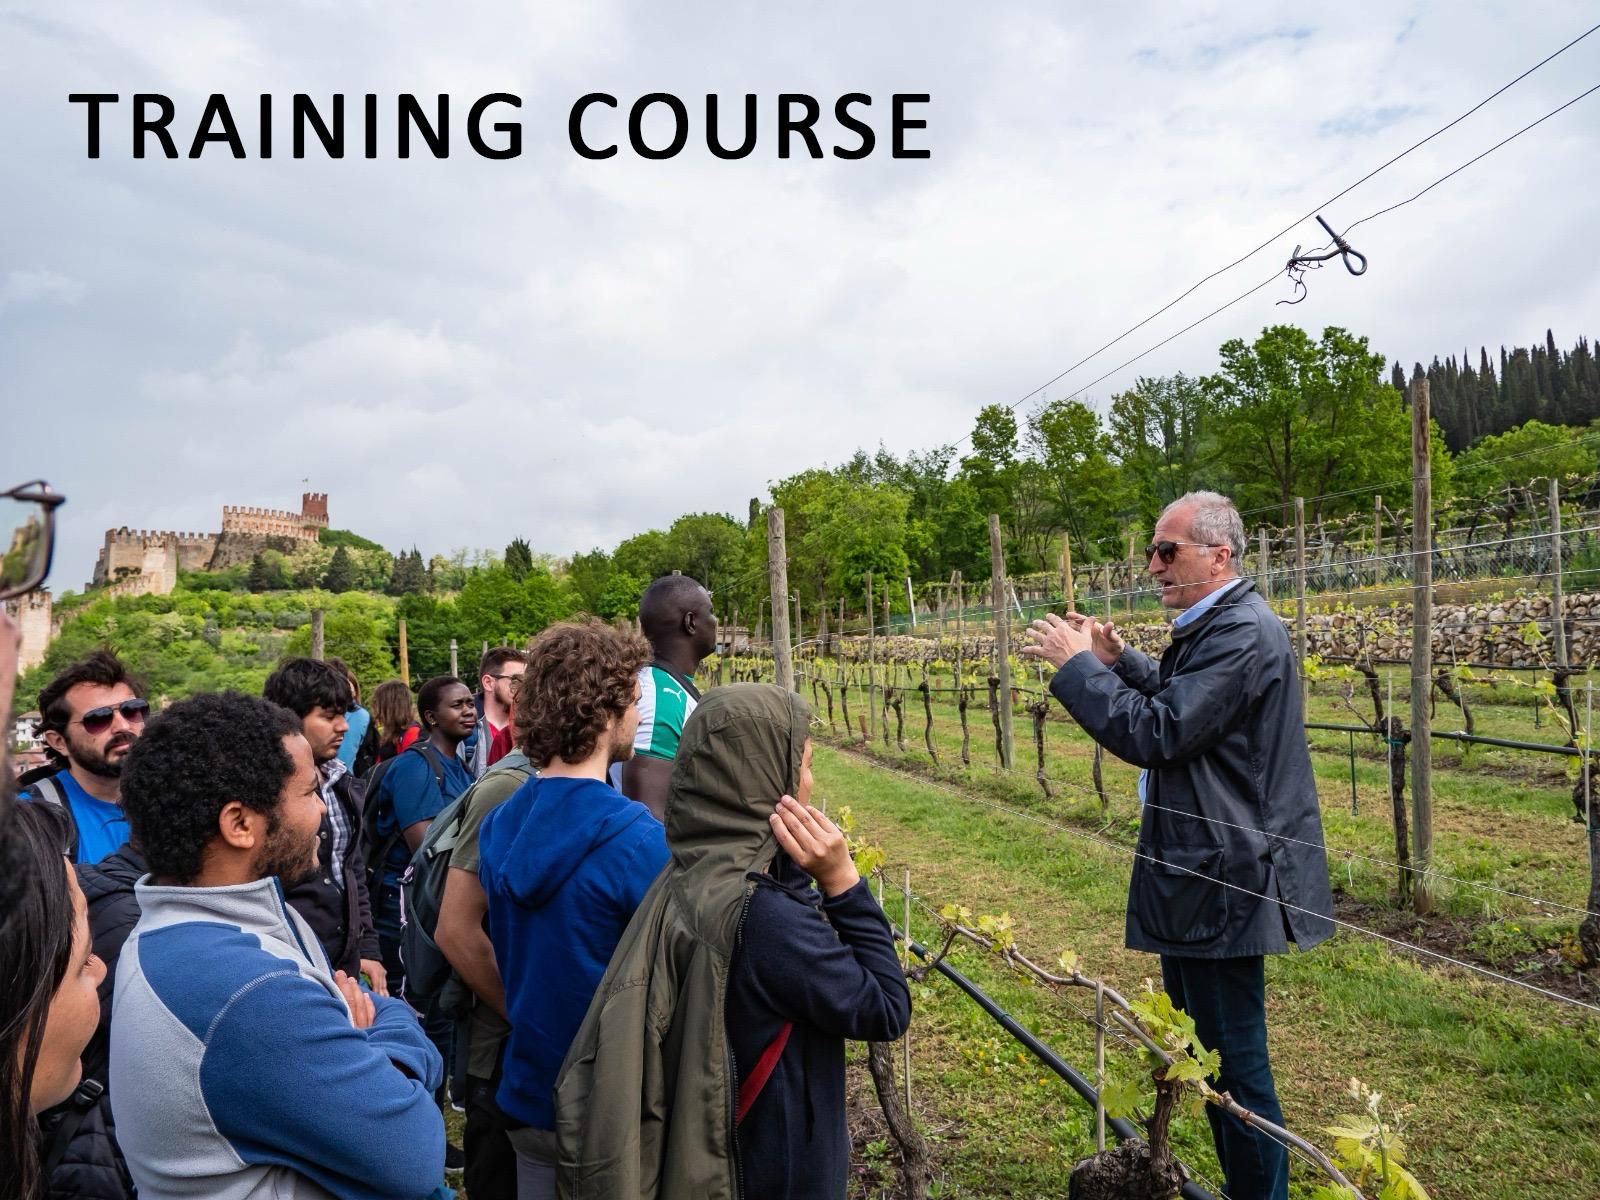 APPLICATIONS FOR THE TRAINING COURSE IS OPEN! HURRY UP, THEY CLOSE ON APRIL 15th!